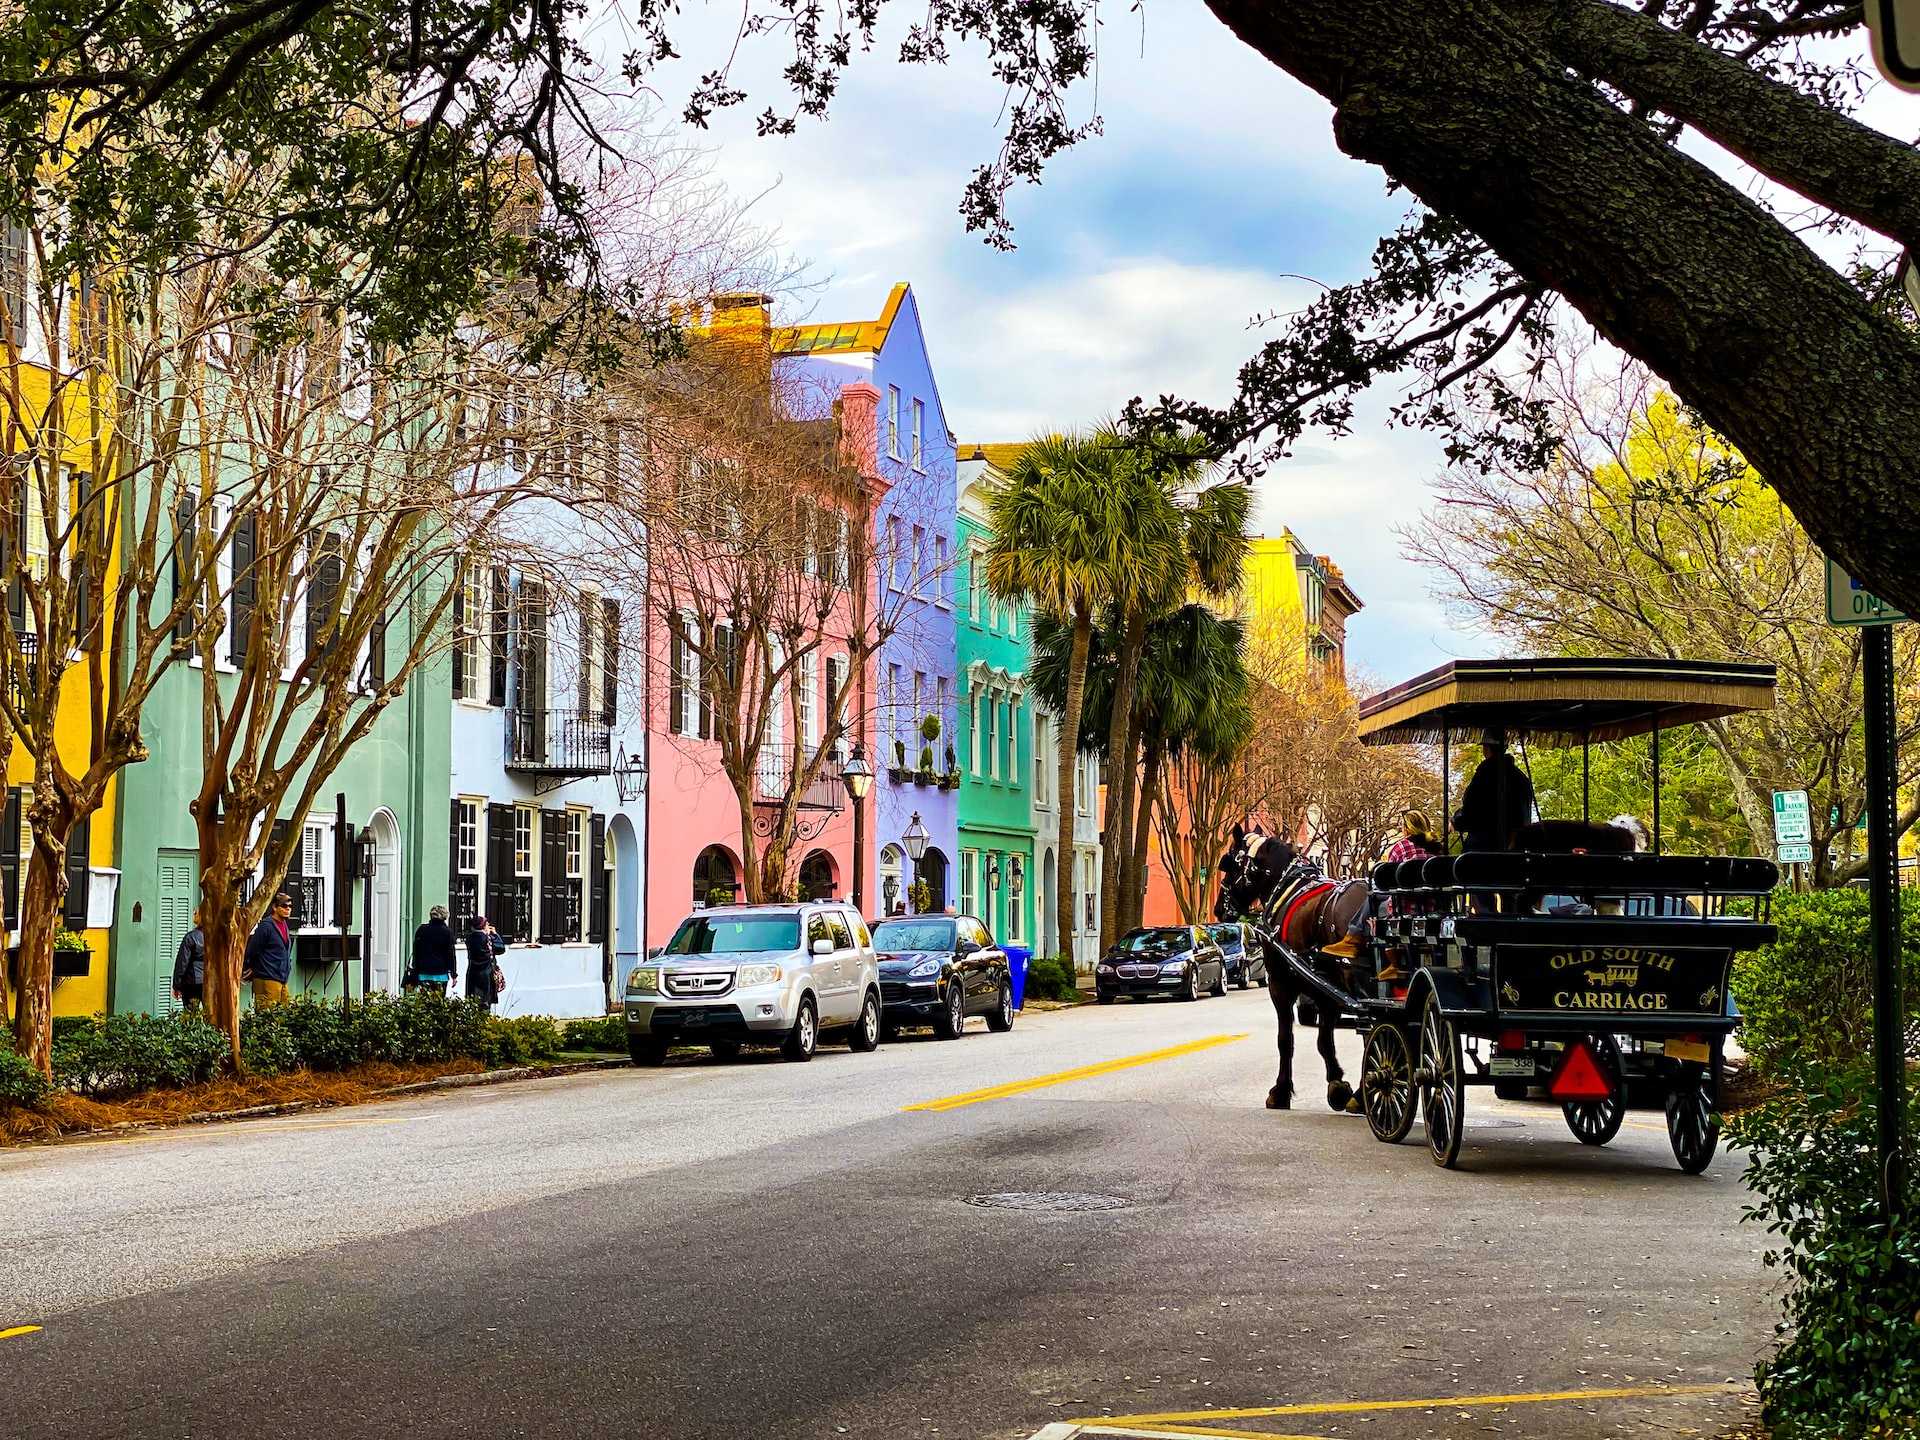 People riding on a horsedrawn cart in Charleston next to colorful buildings.